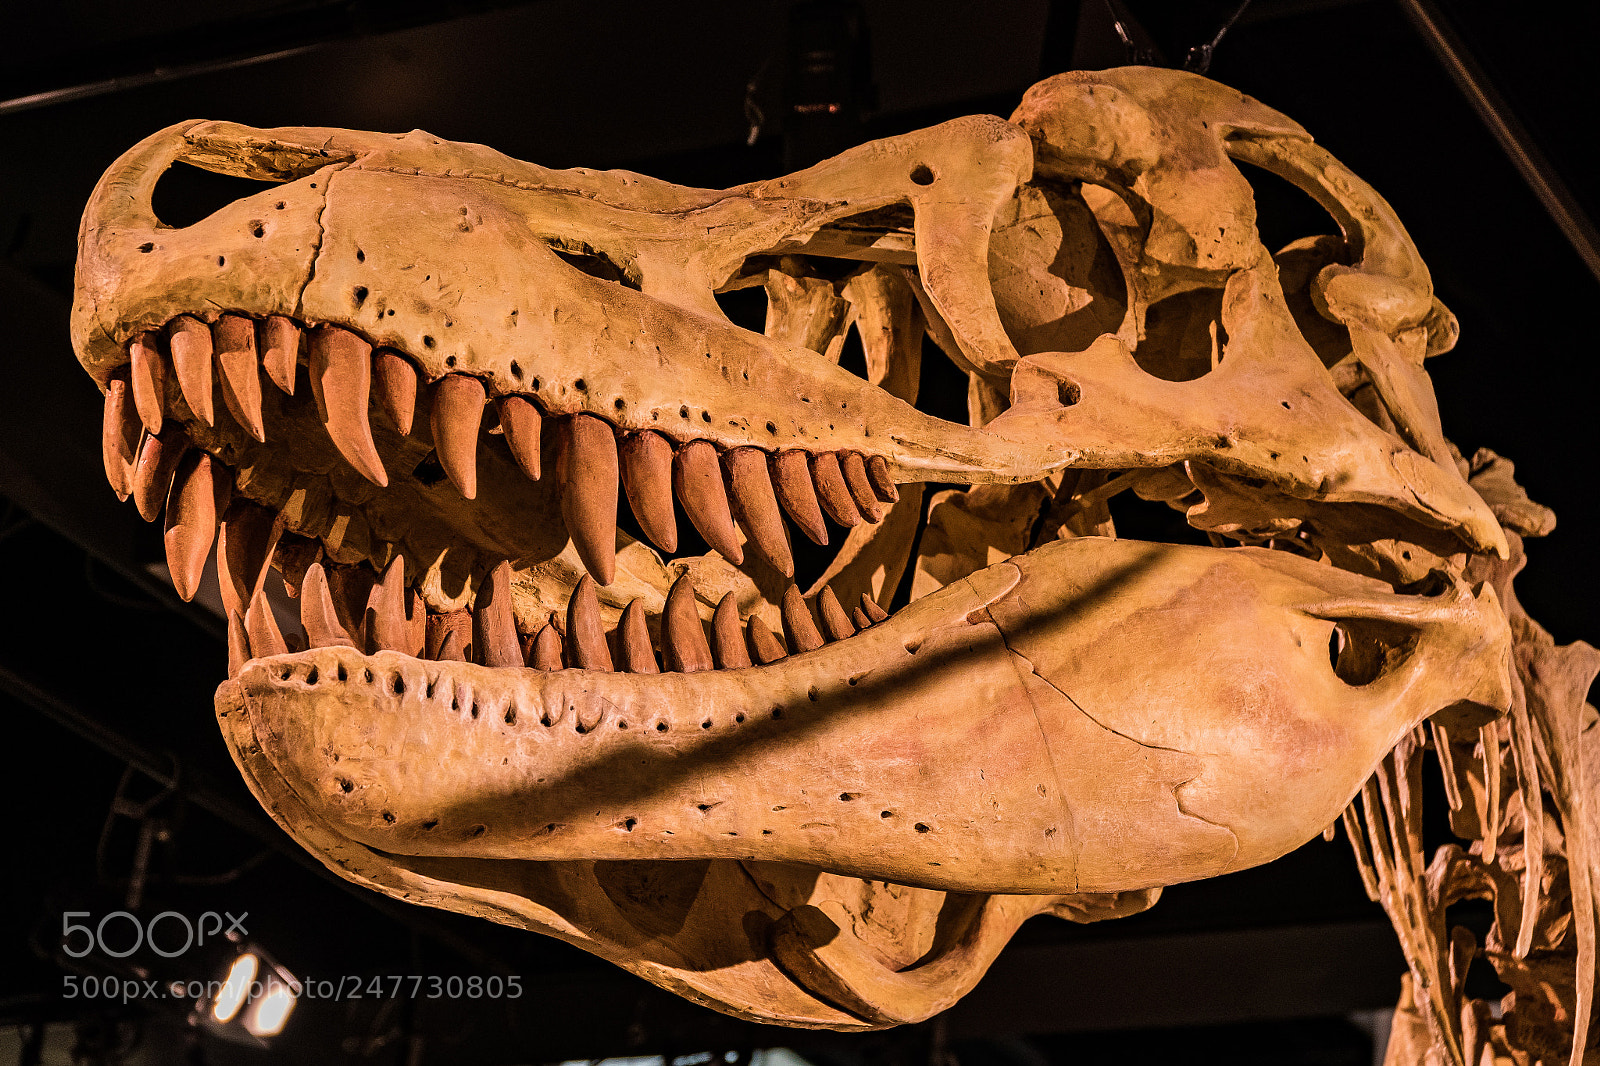 Sony a6300 sample photo. Fossils at the melbourne photography